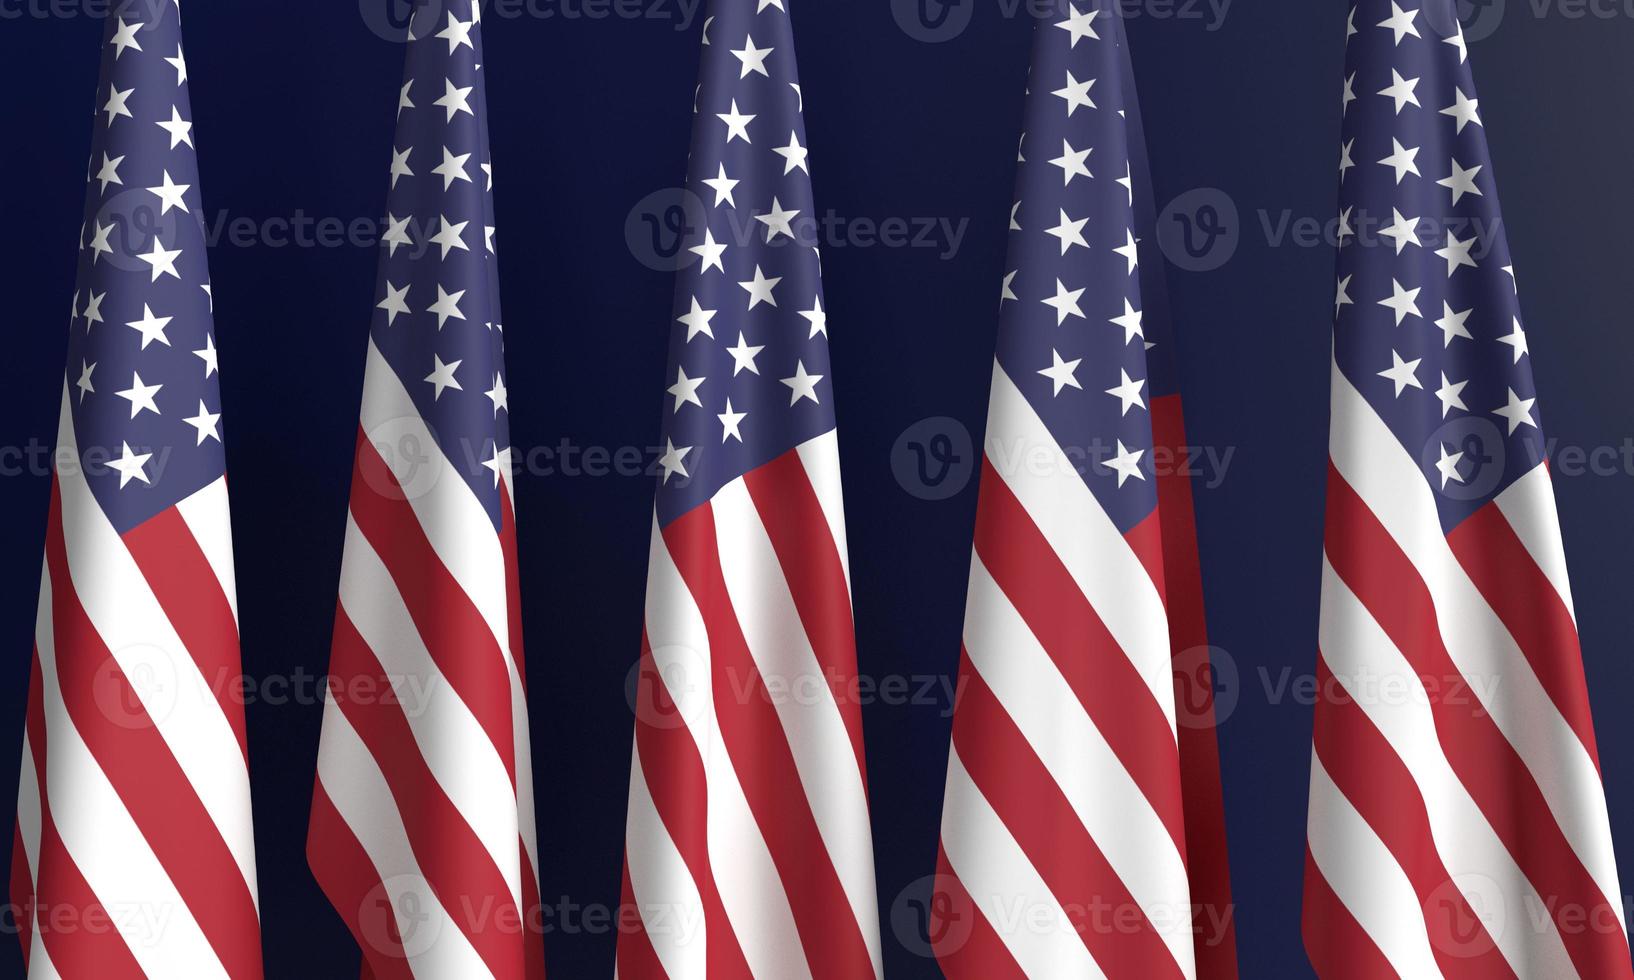 United state of america usa flag country international background wallpaper symbol sign memorial star patriotic national blue red  independence veteran stripe freedom may  government peace.3d render photo